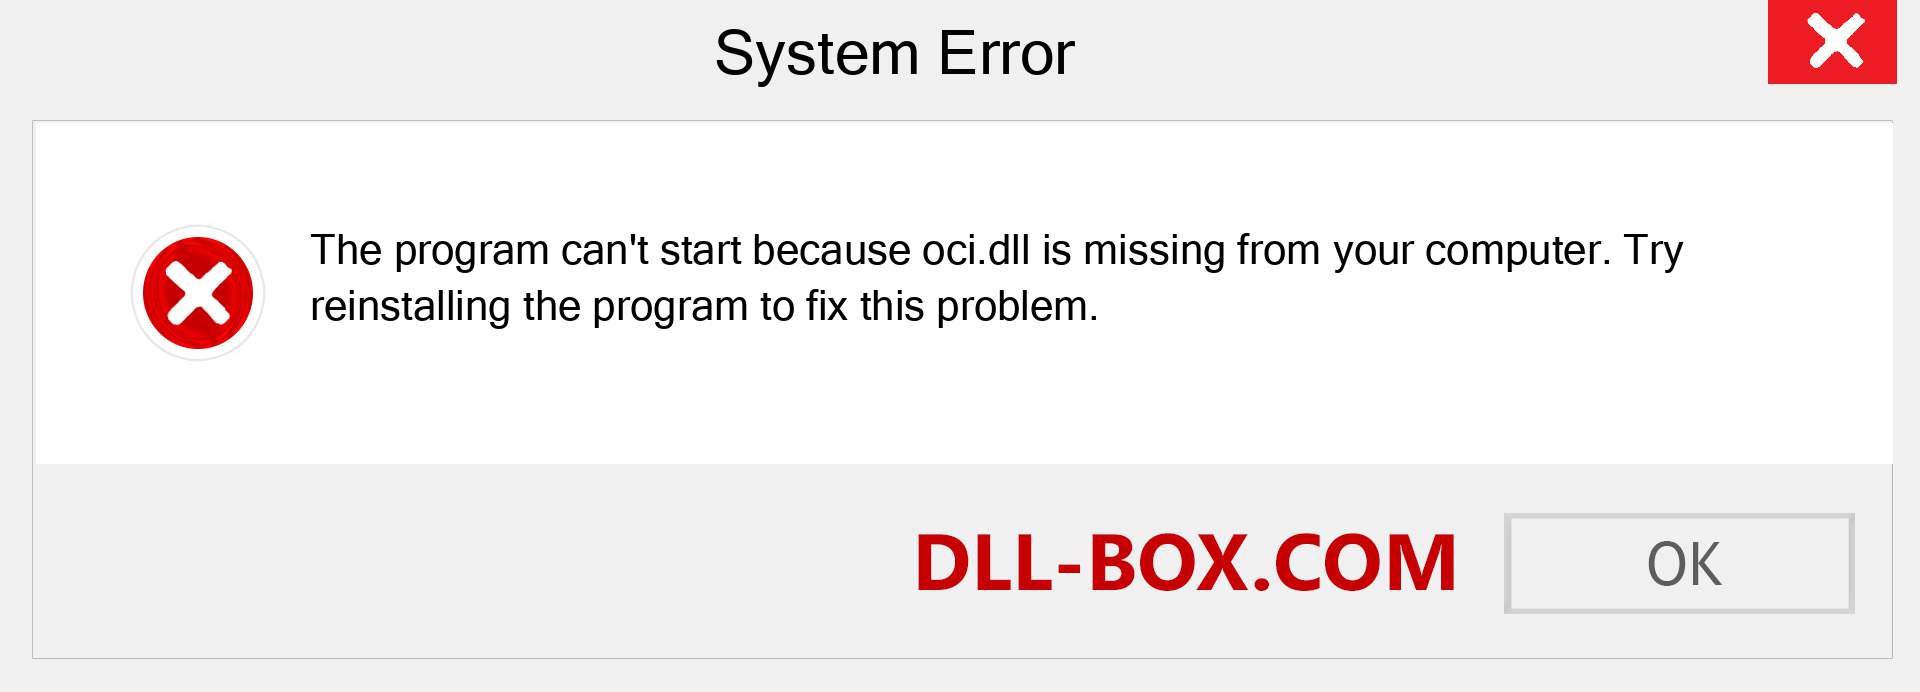  oci.dll file is missing?. Download for Windows 7, 8, 10 - Fix  oci dll Missing Error on Windows, photos, images